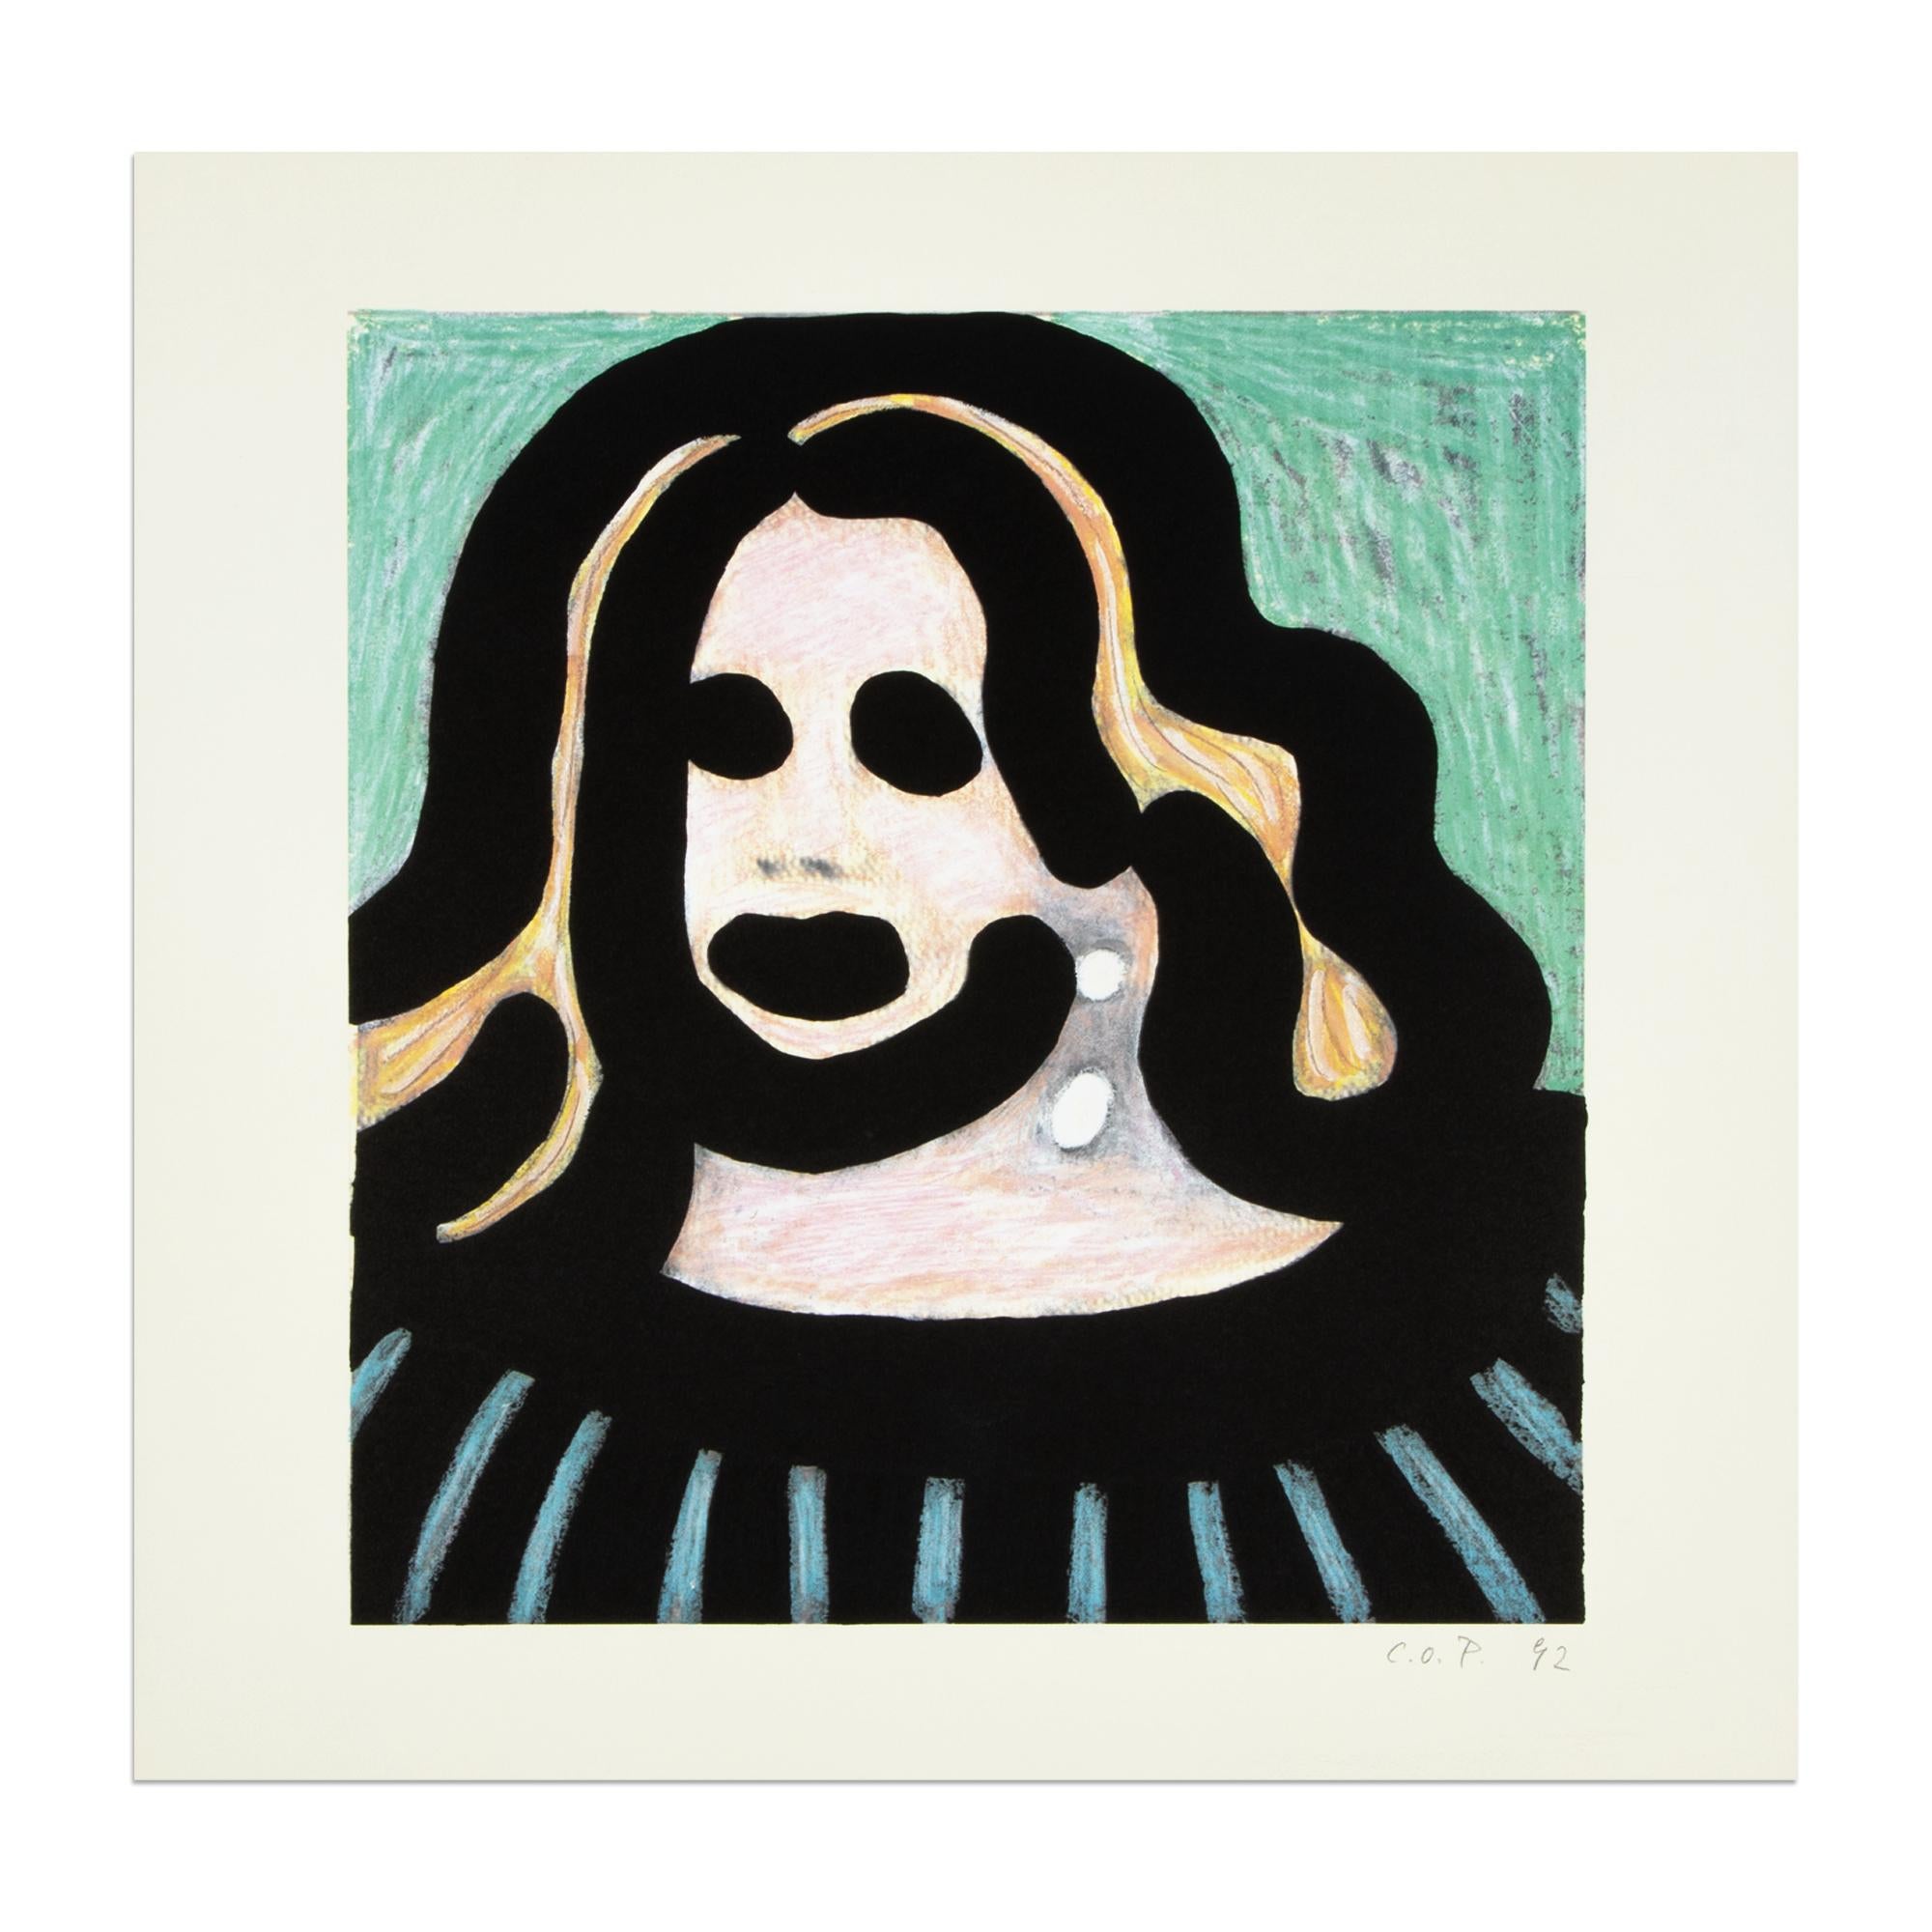 C.O. Paeffgen (German, 1933-2019)
Jeanne Moreau, 1992
Medium: Offset lithograph on card stock
Dimensions: 49.5 x 50 cm
Edition of 100: Monogrammed, numbered and dated
Condition: Very good